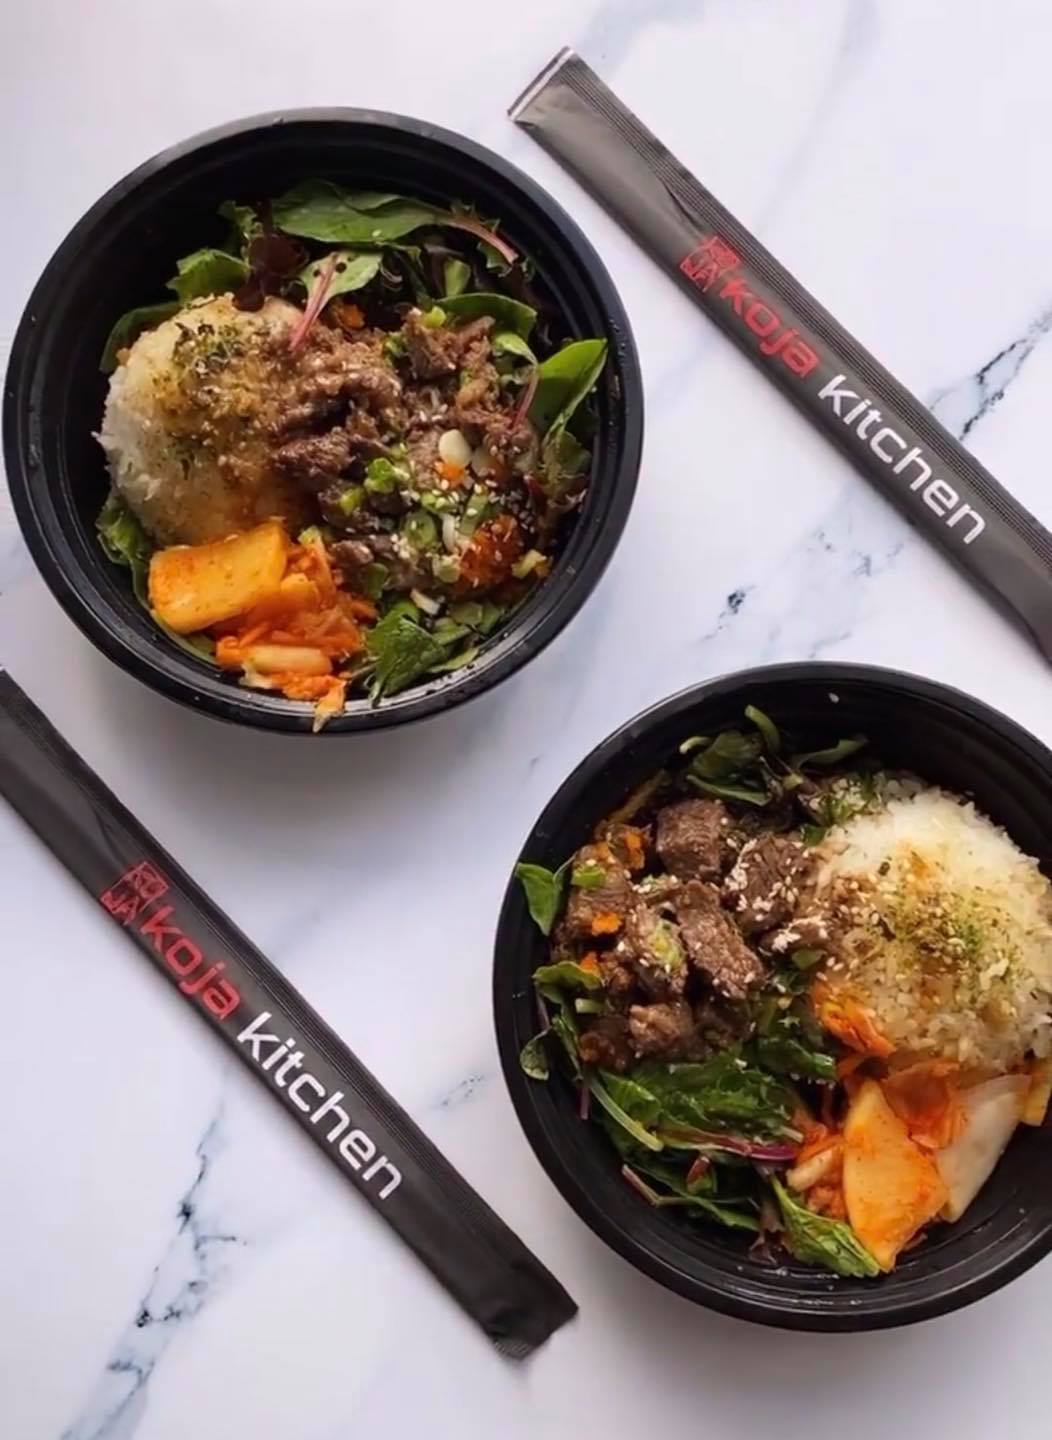 Korean-Japanese fusion meal of two rice bowls and chopsticks from Koja Kitchen.